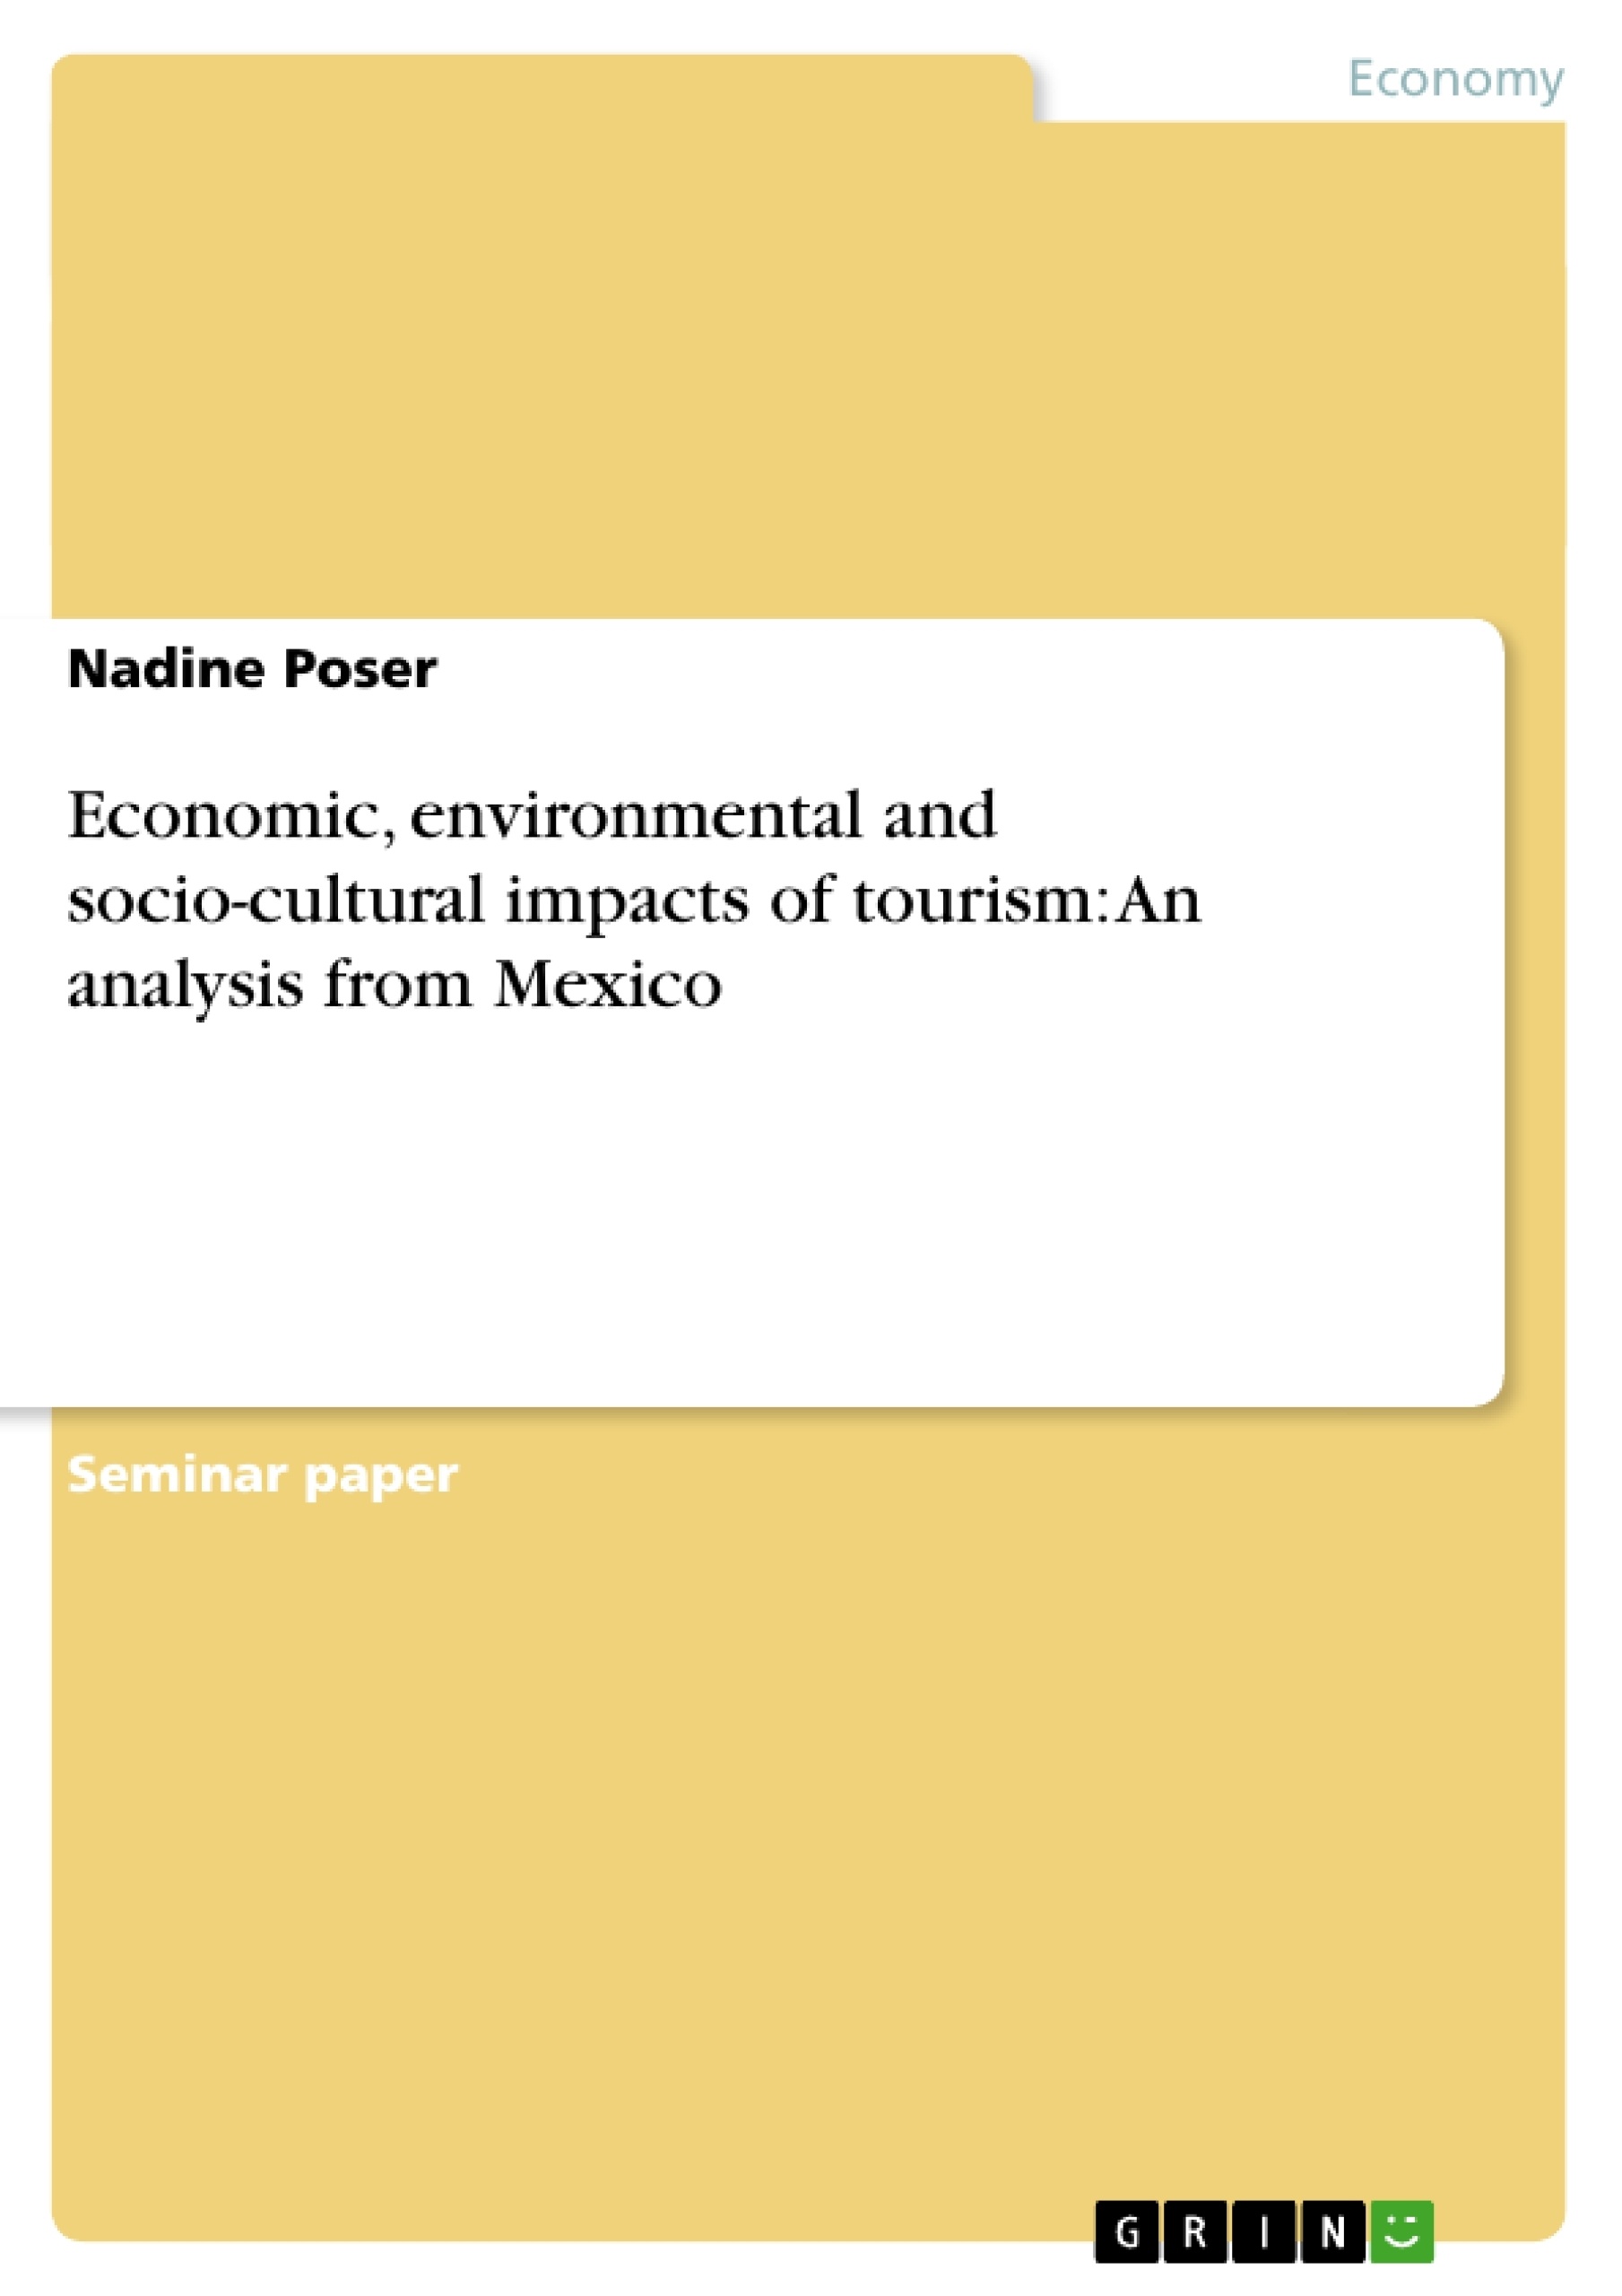 Title: Economic, environmental and socio-cultural impacts of tourism: An analysis from Mexico